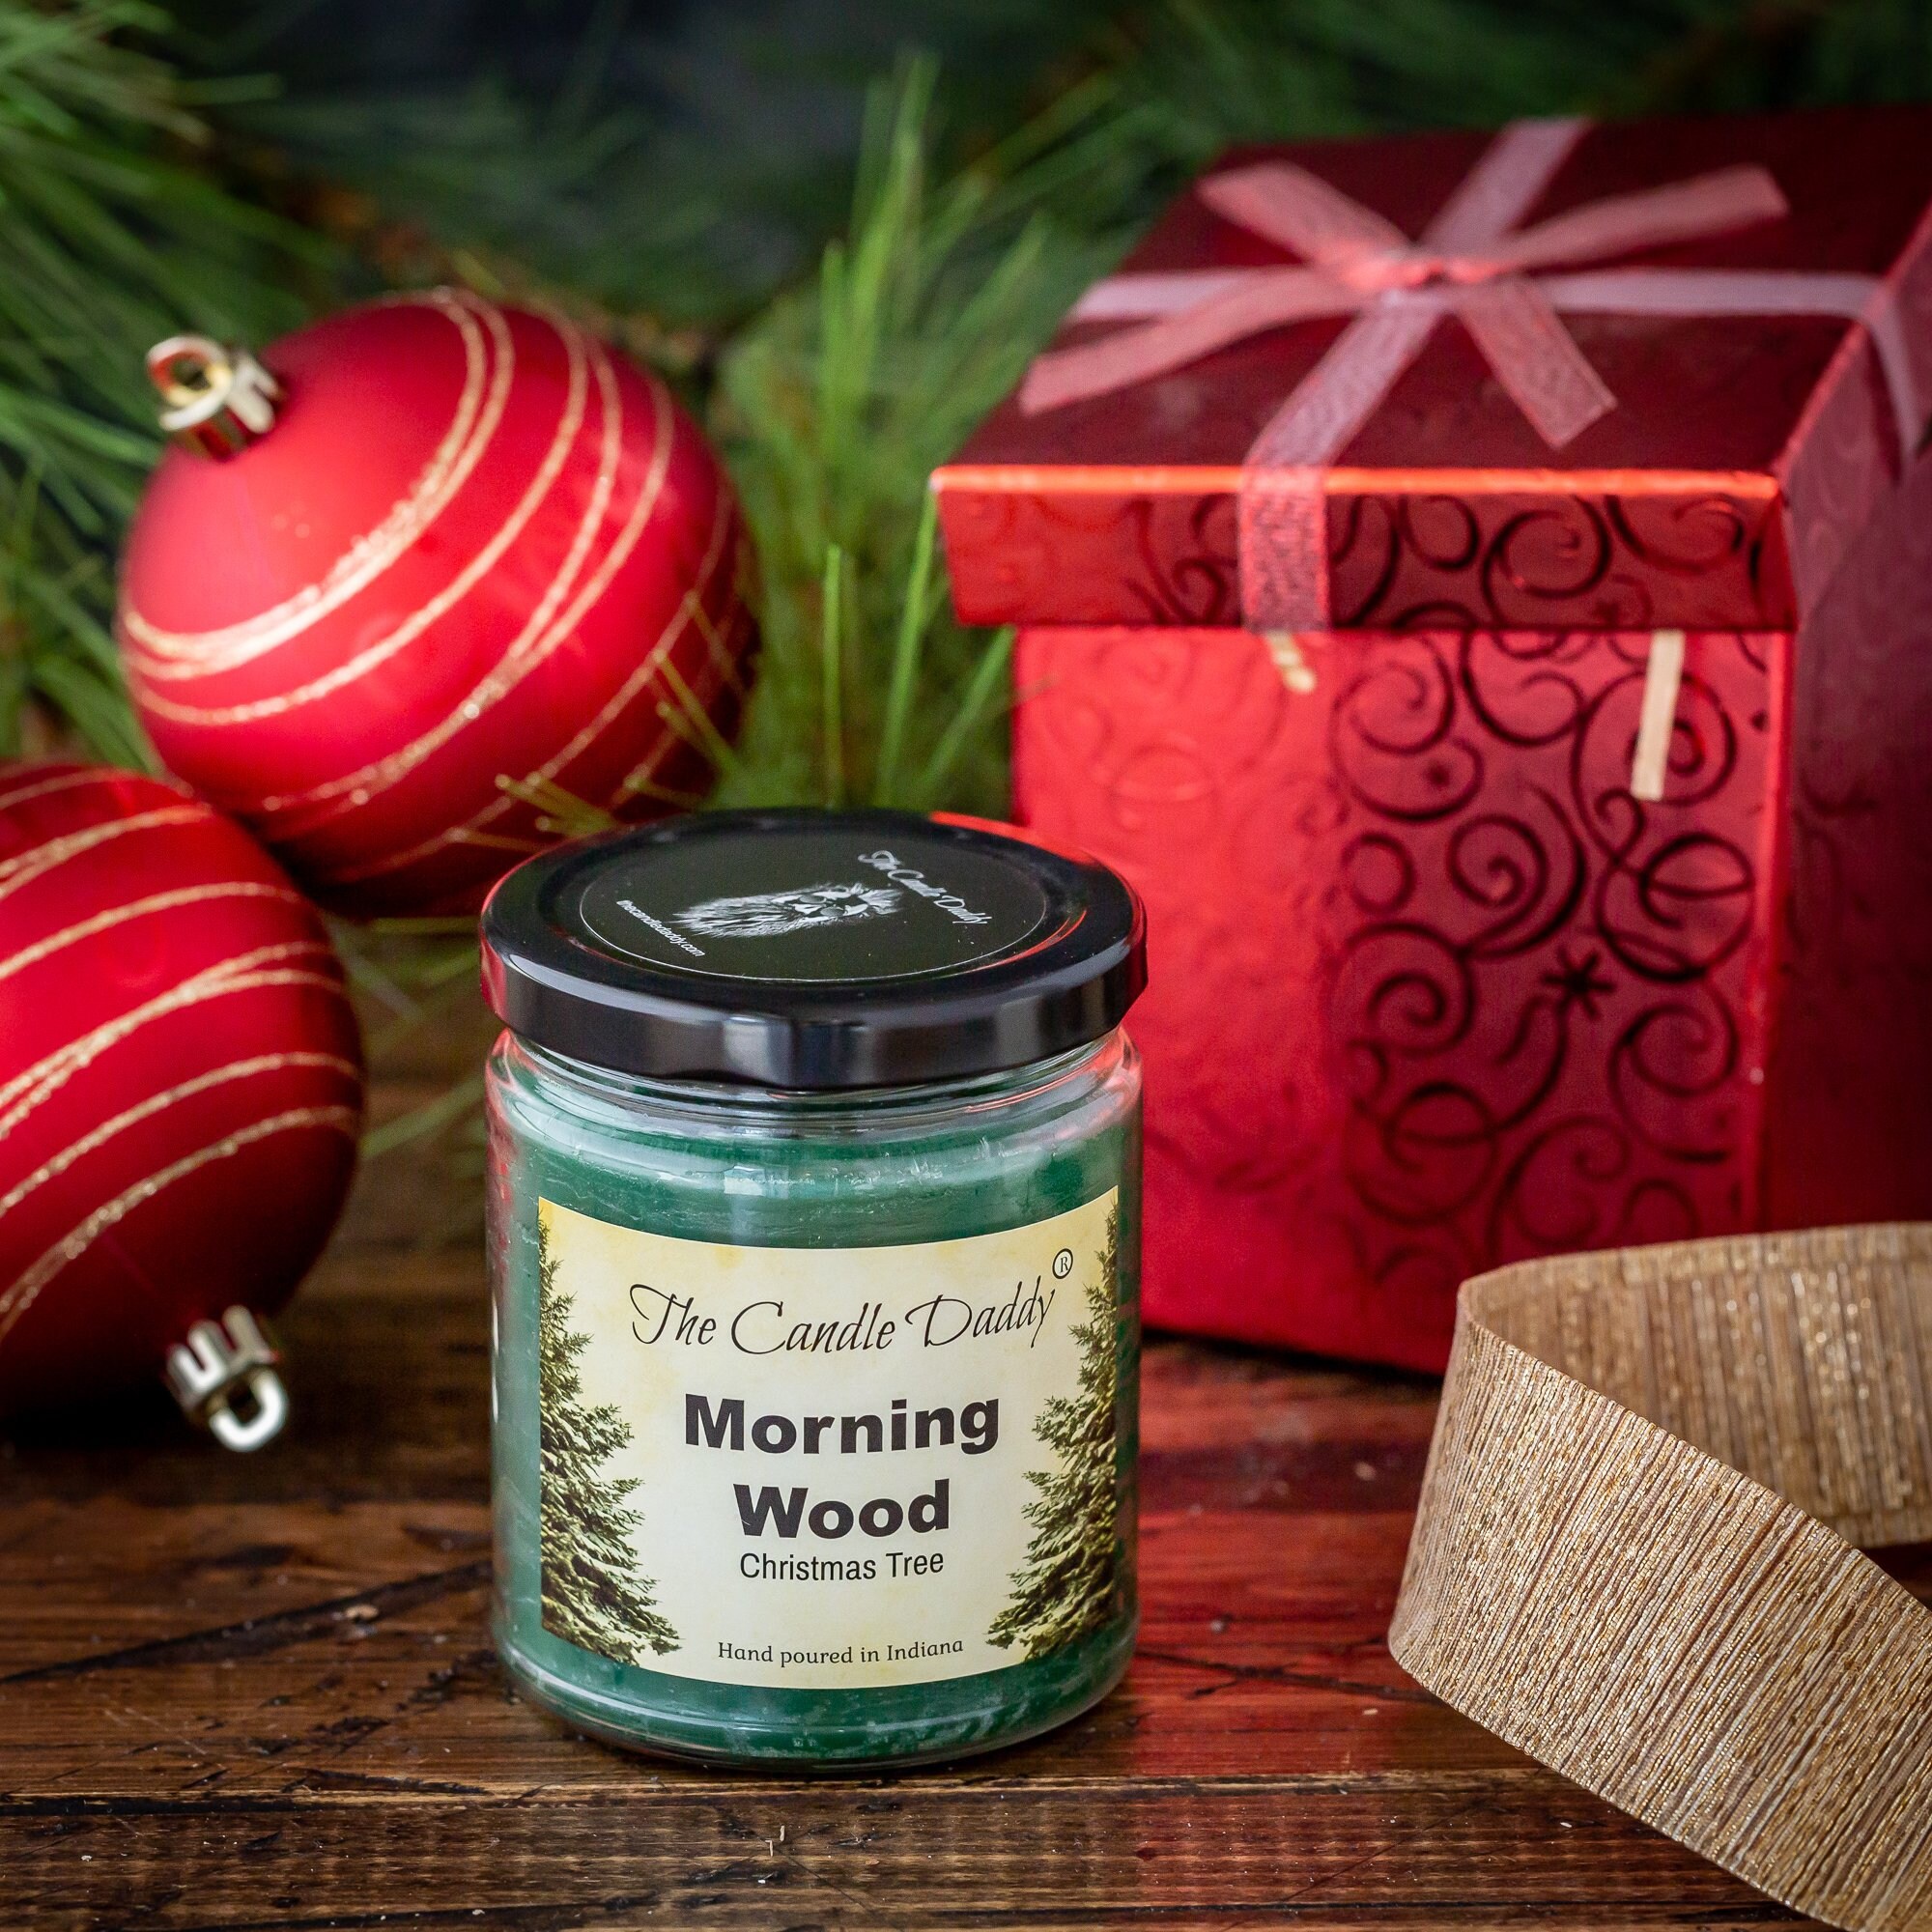 Fromunda The Mistletoe Holiday Candle - Funny Blue Spruce Pine Tree Scented  Candle - Funny Holiday Candle for Christmas, New Years - Long Burn Time